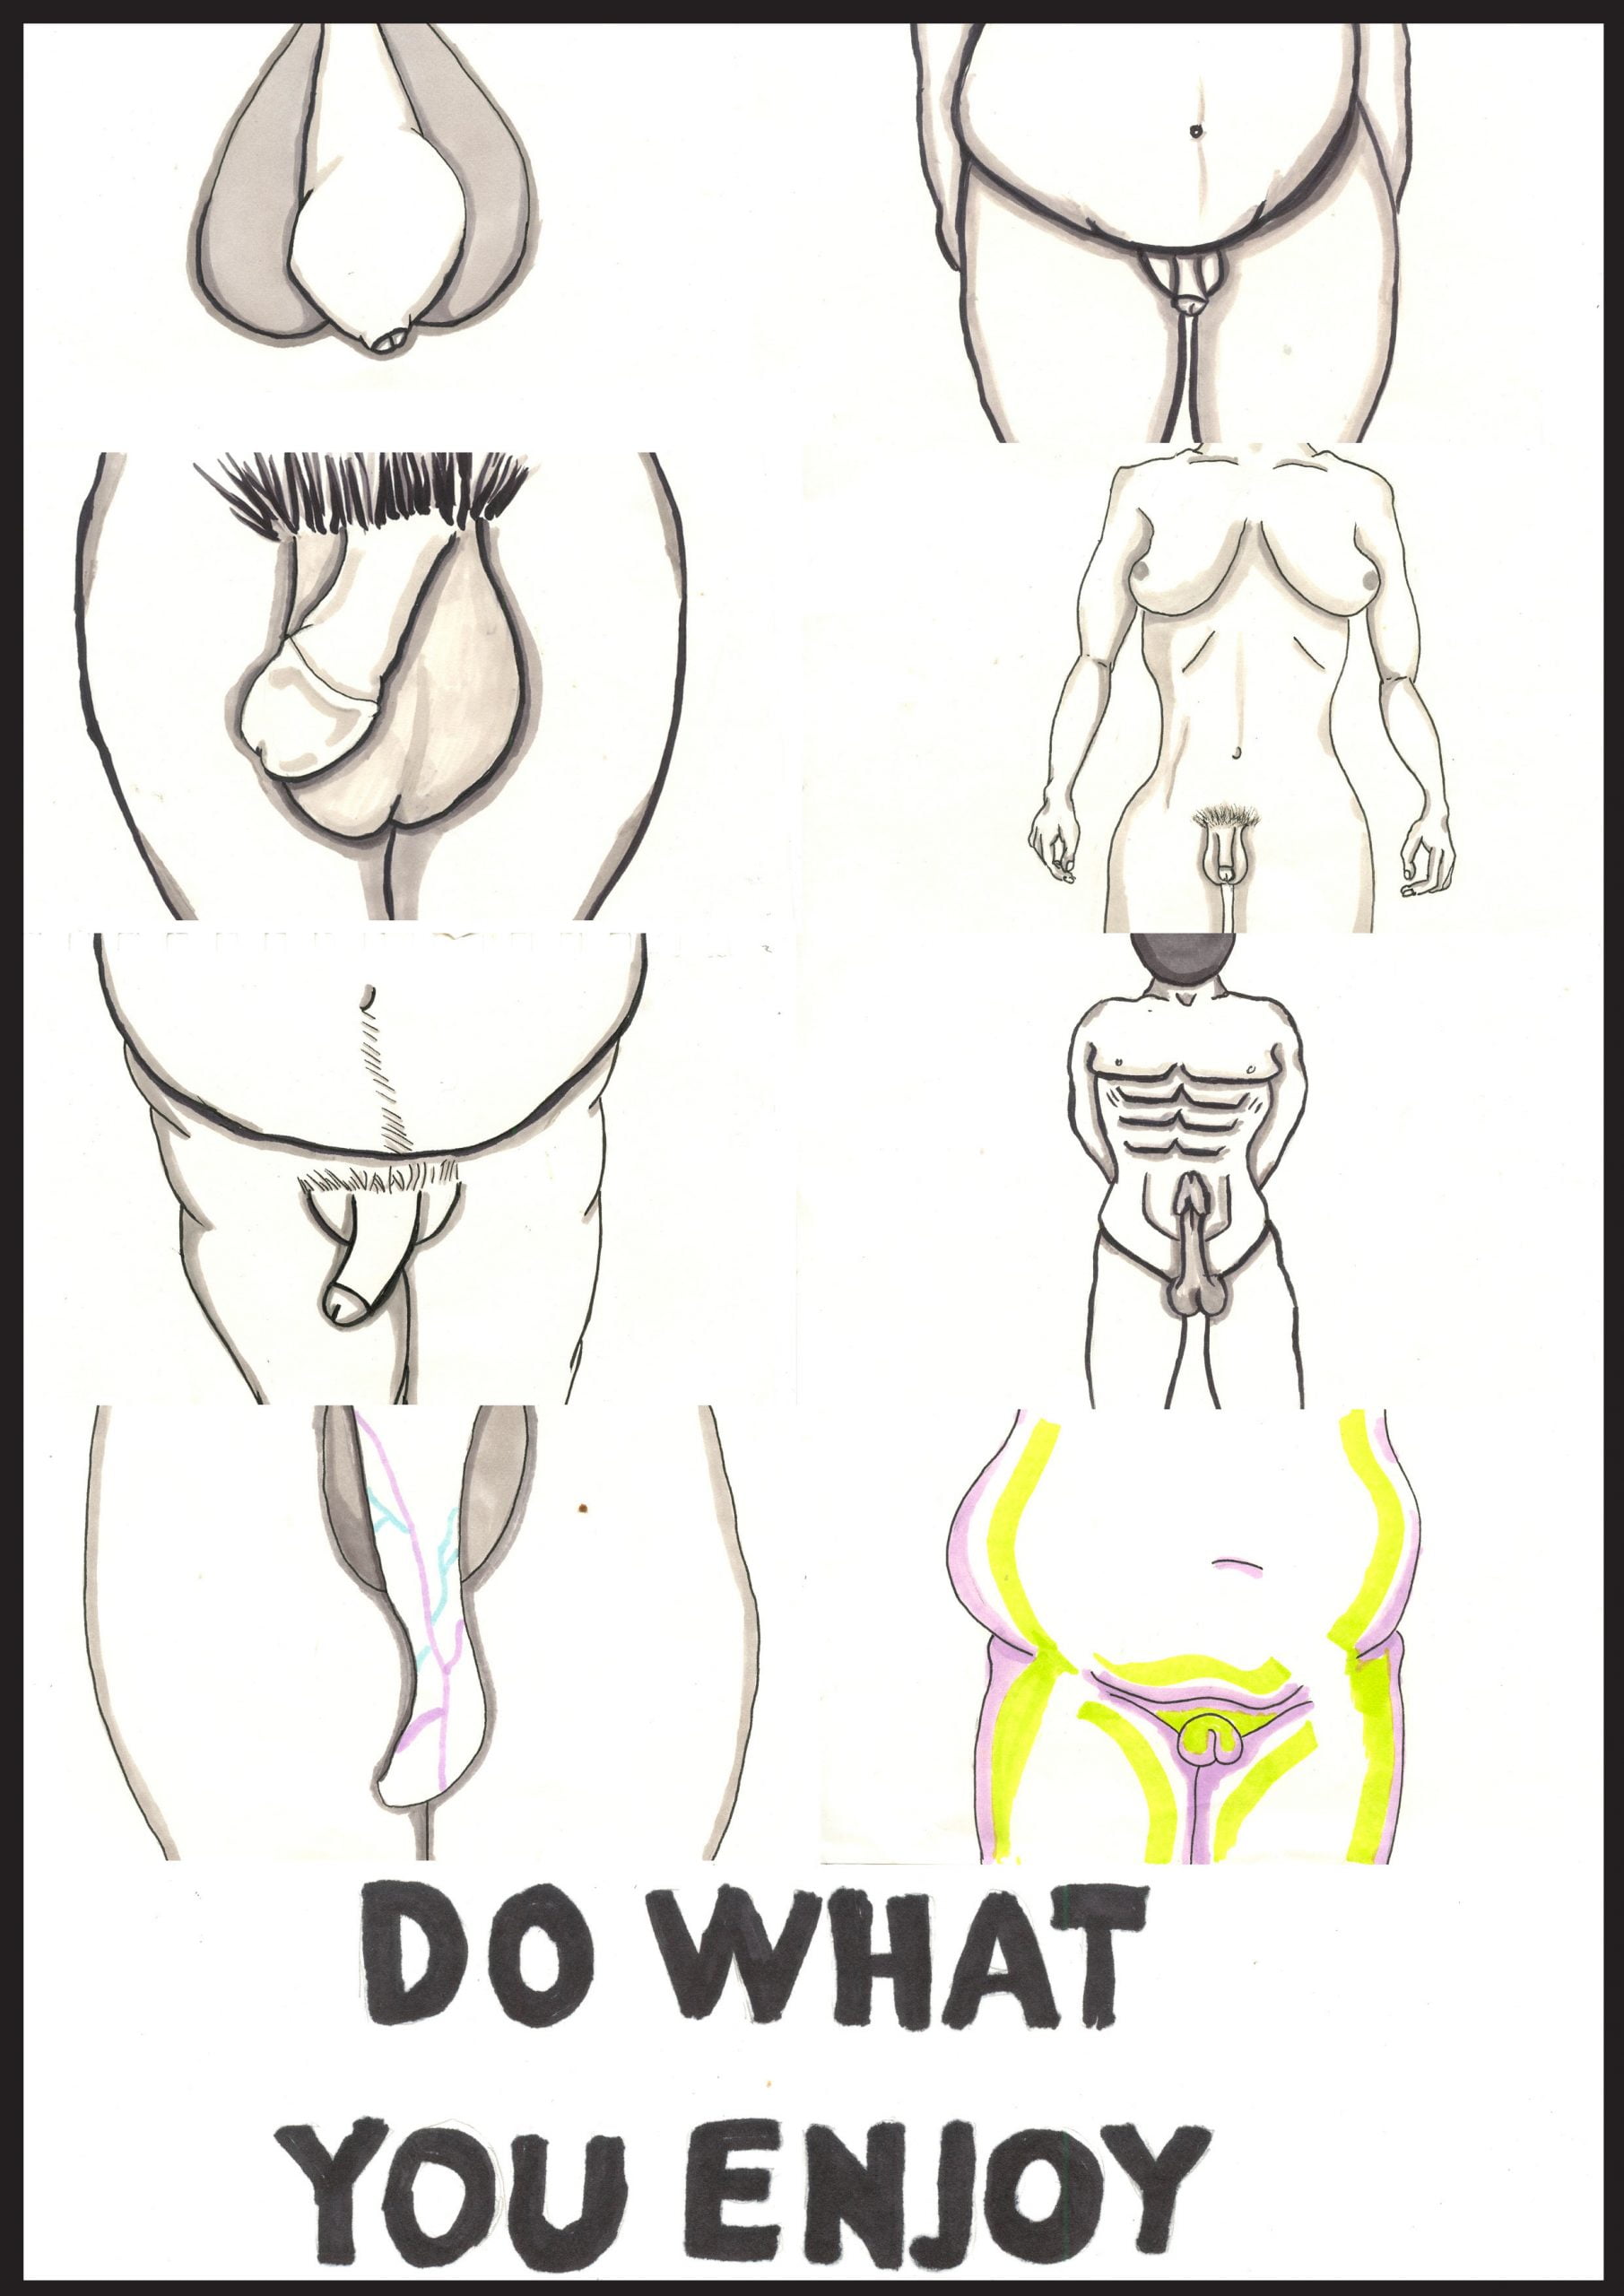 In a two by eight grid filling the page are various drawings of different genitalia in black pen. In thick black writing below reads: “Do what you enjoy”